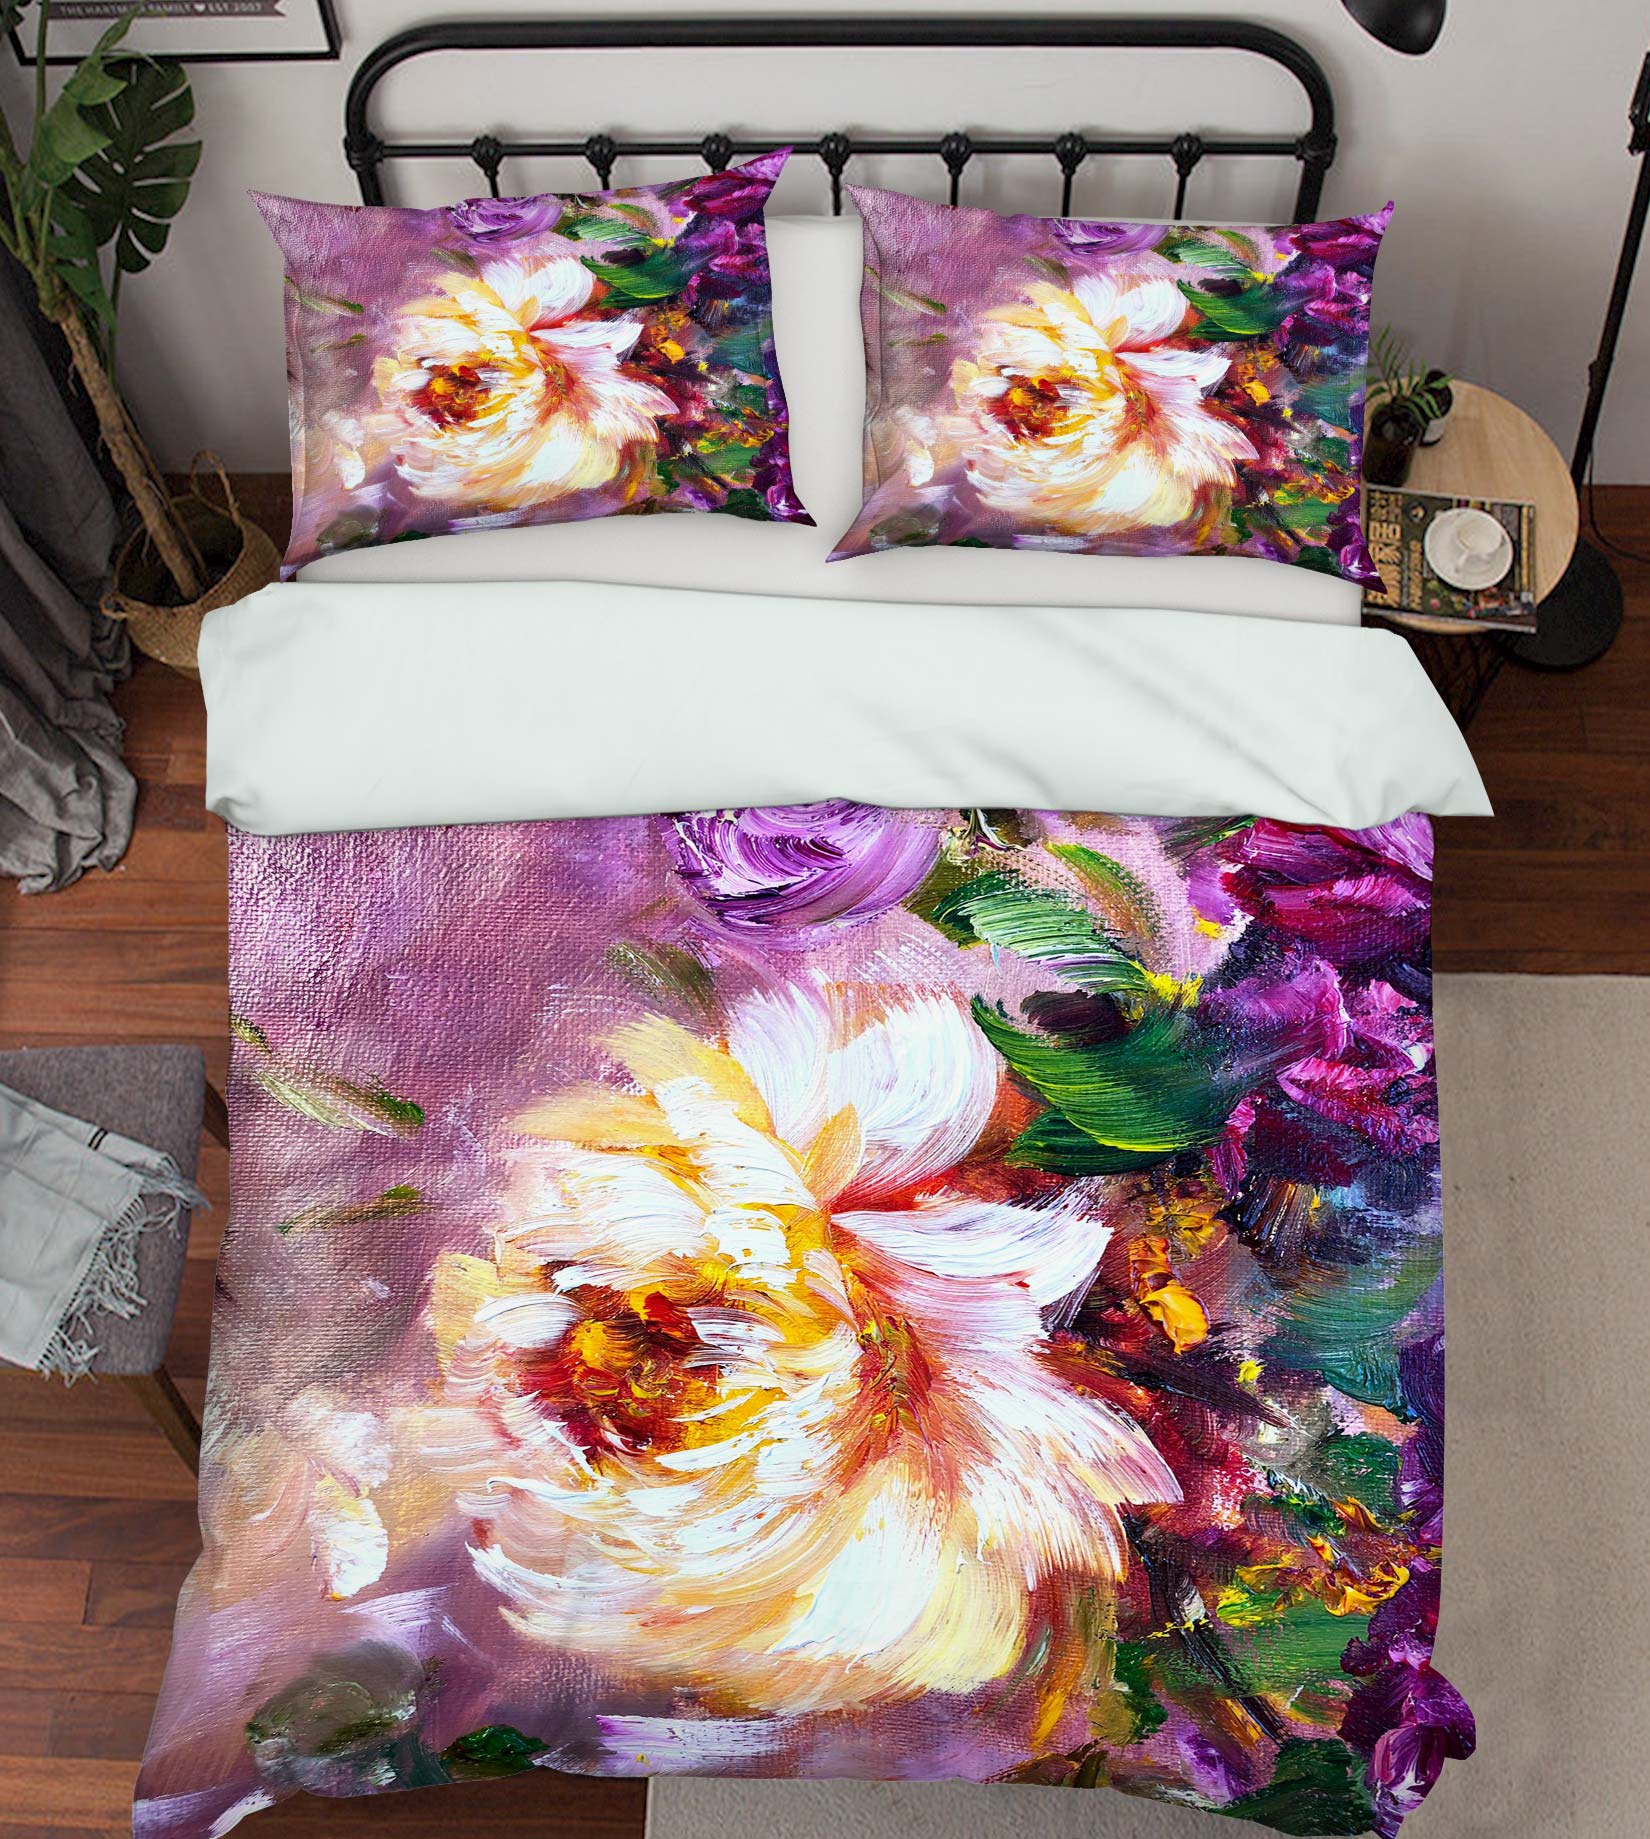 3D Painted Flowers 502 Skromova Marina Bedding Bed Pillowcases Quilt